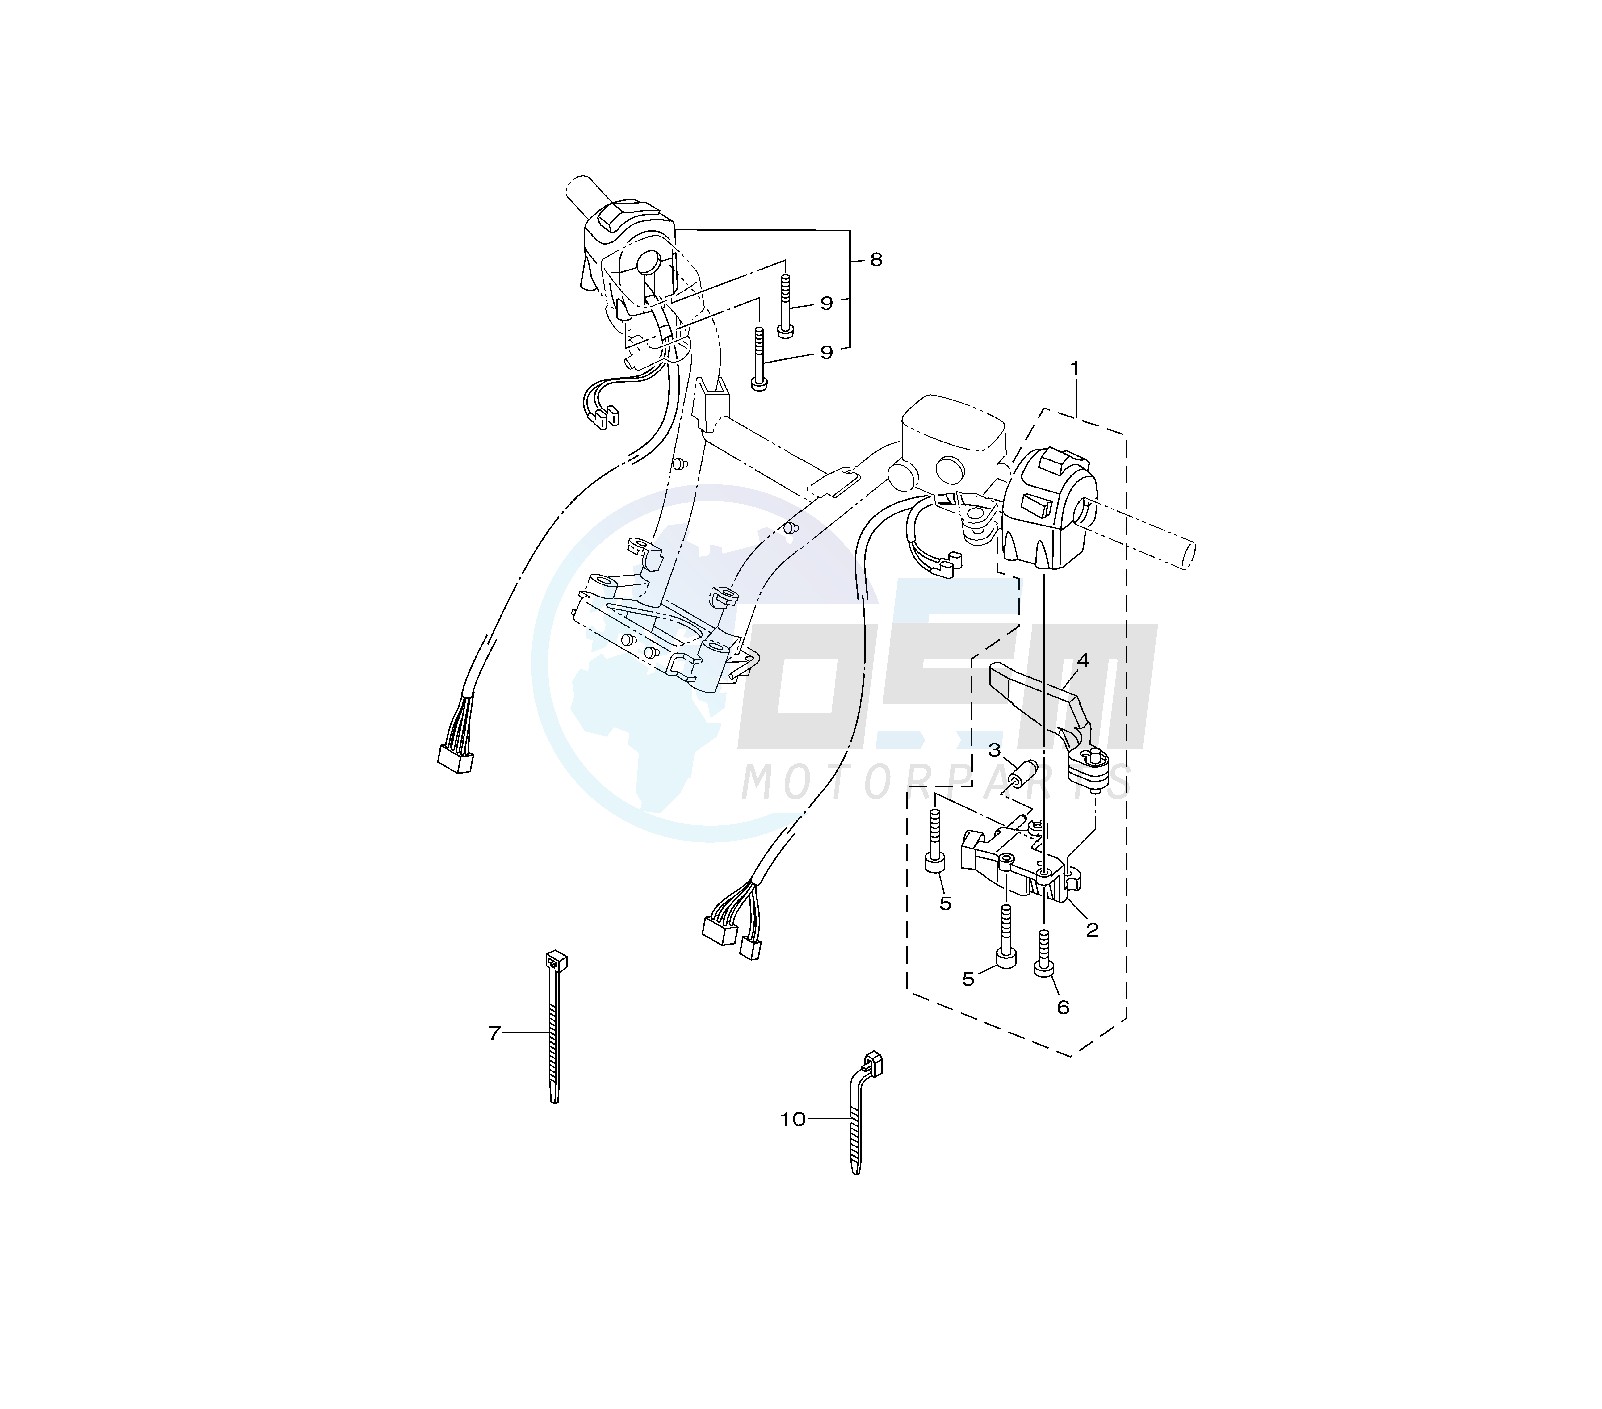 HANDLE SWITCH AND LEVER blueprint